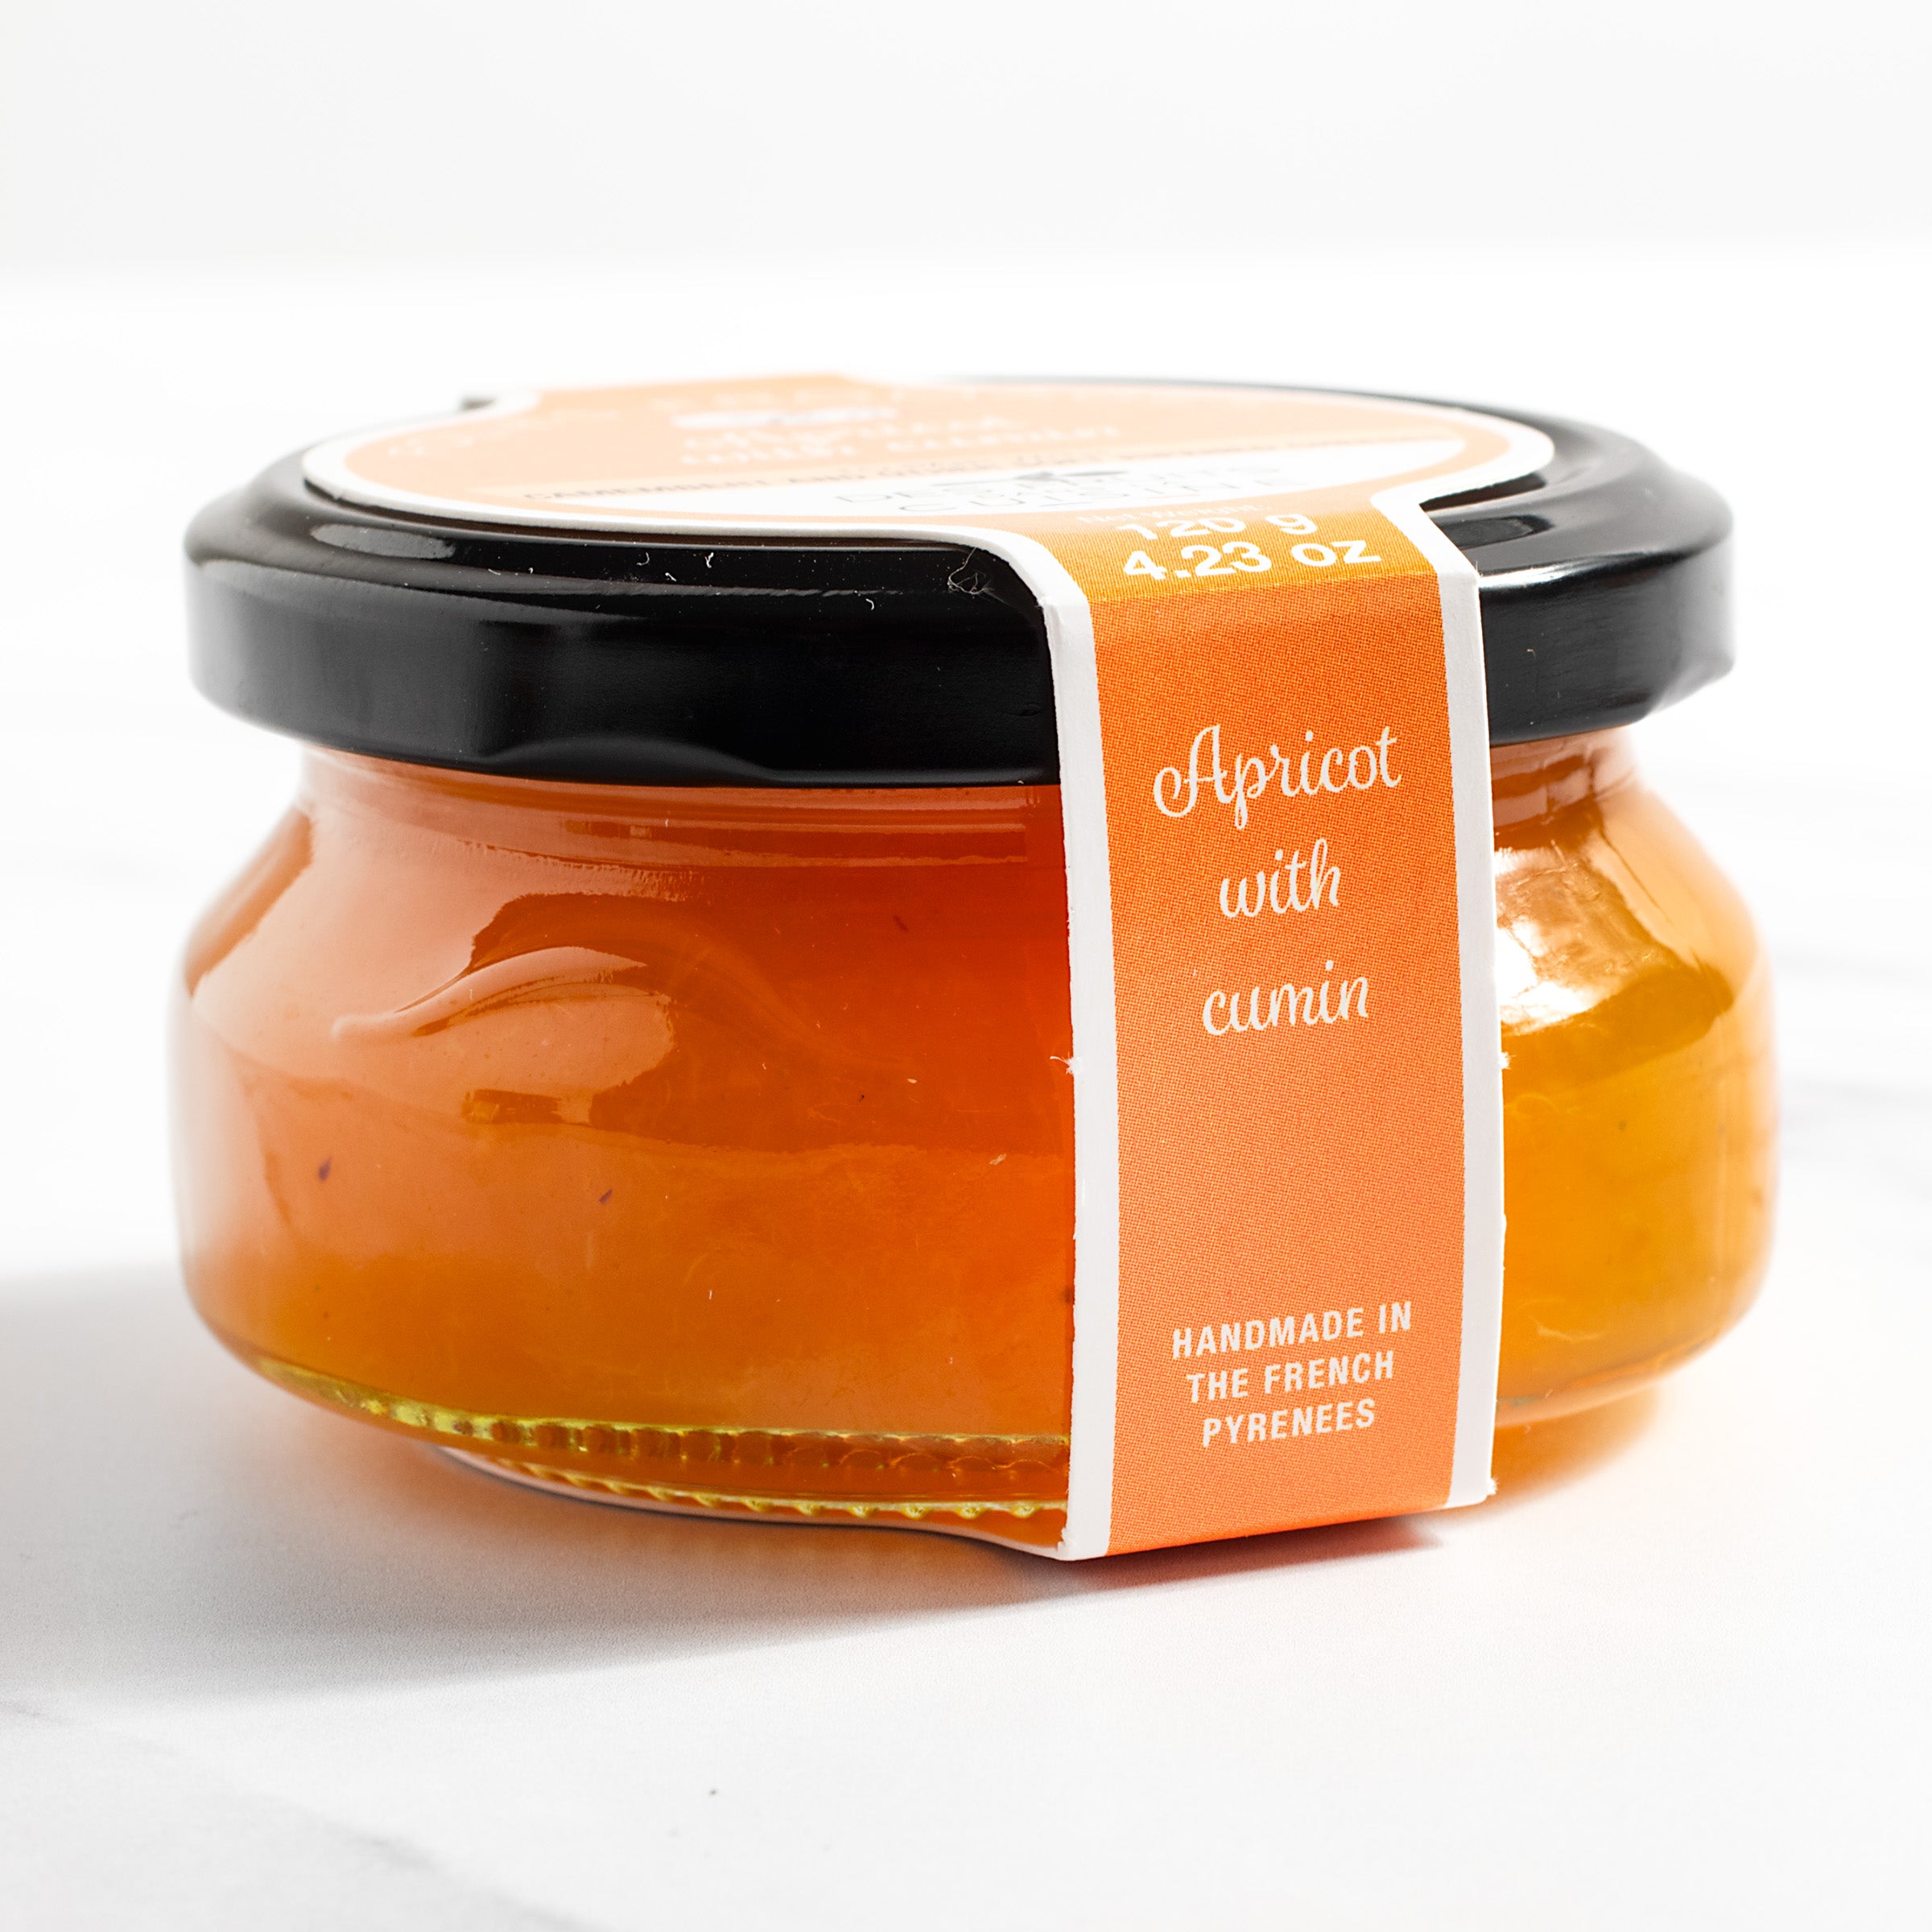 French Apricot & Cumin Spread for Camembert & Brie Cheeses